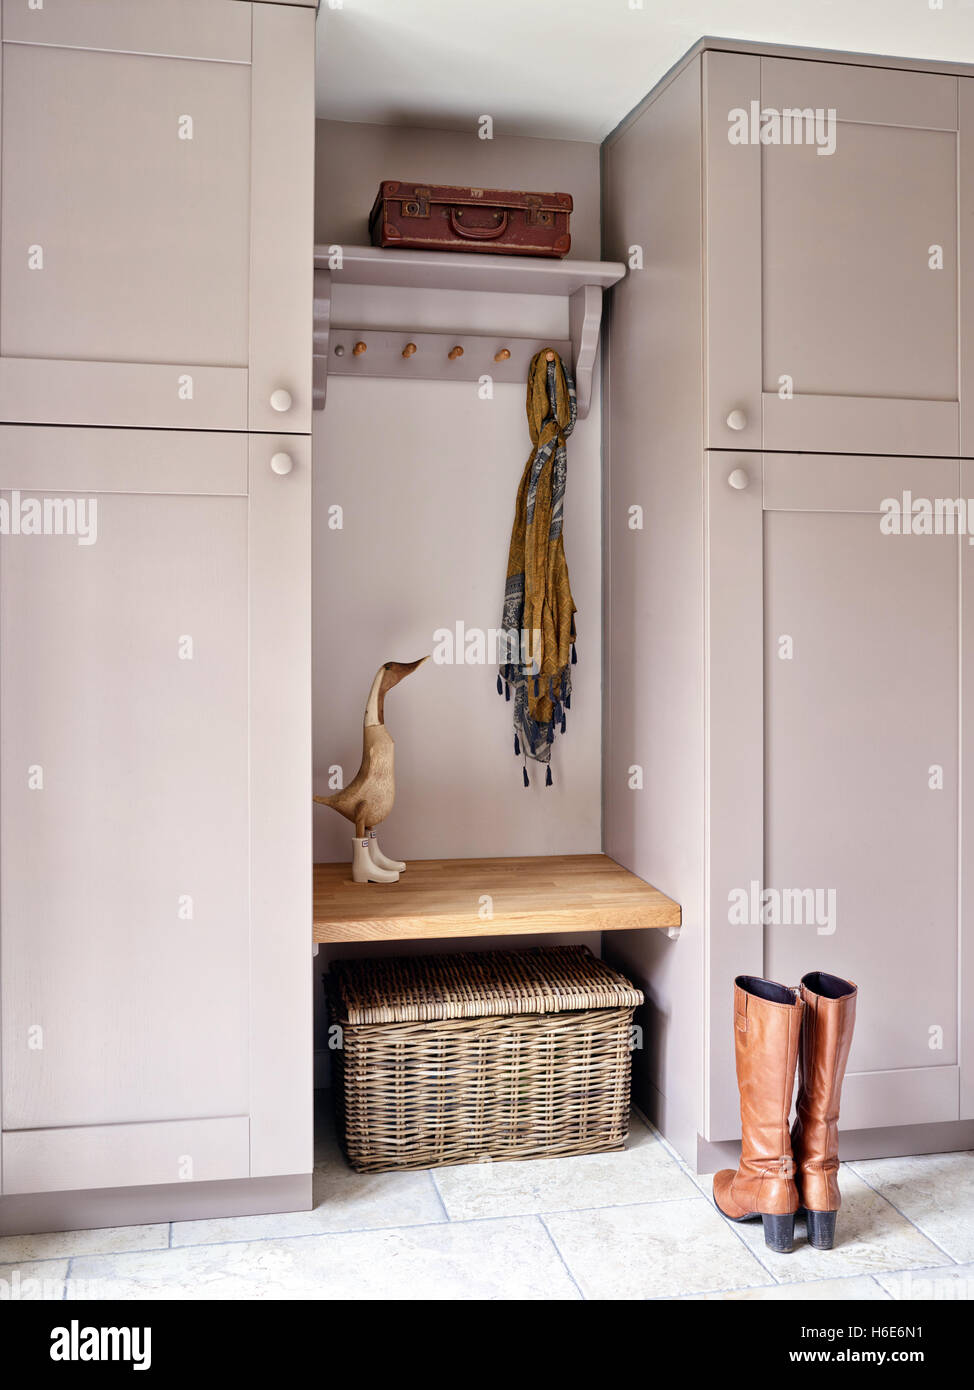 Bespoke fitted cupboards & hanging space in a UK country home Stock Photo